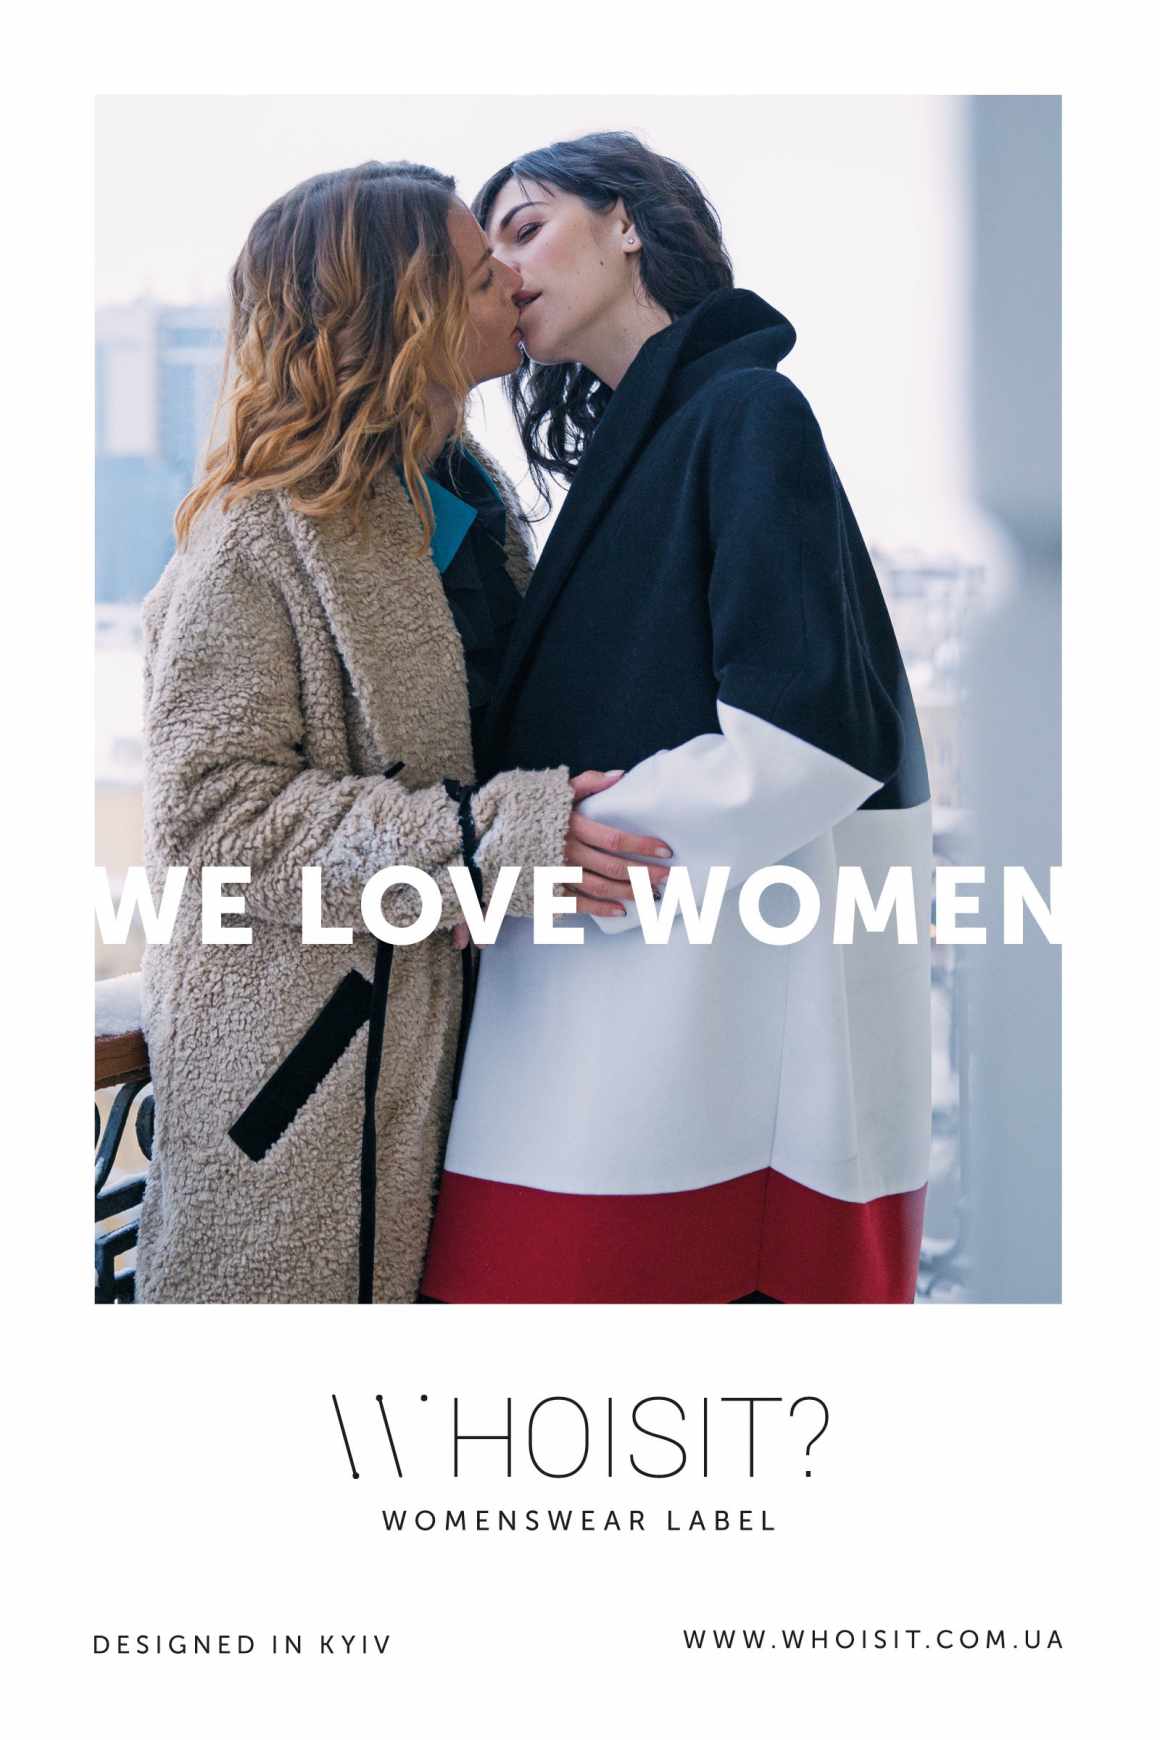 whoisit?: We love women Campaigns of the World®